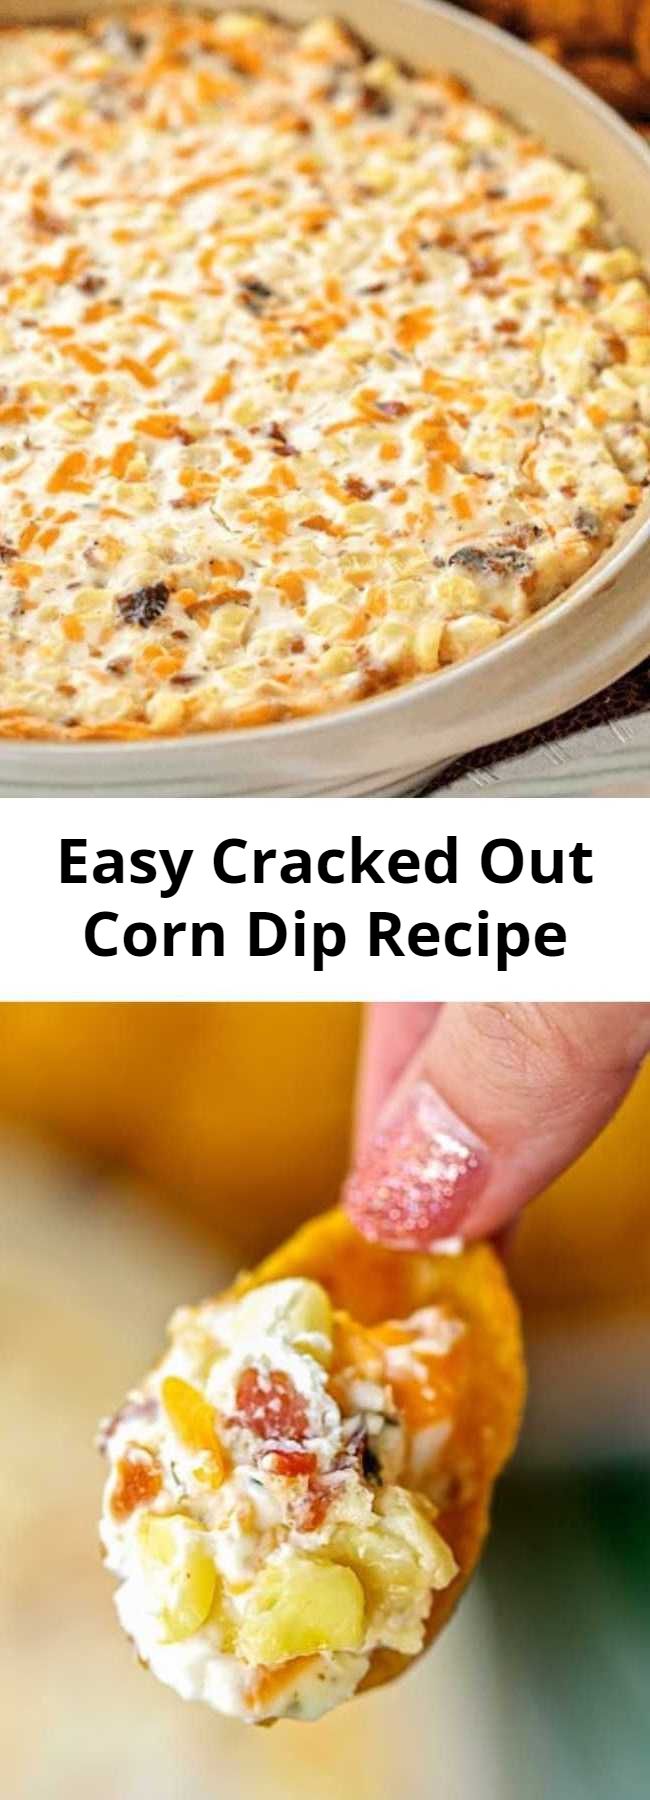 Easy Cracked Out Corn Dip Recipe - Corn, cream cheese, sour cream, cheddar, bacon and Ranch. I took this to a party and it was the first thing to go! Can make ahead and refrigerate until ready to eat. Our FAVORITE dip! YUM #dip #appetizer #partyfood #corn #bacon #ranch